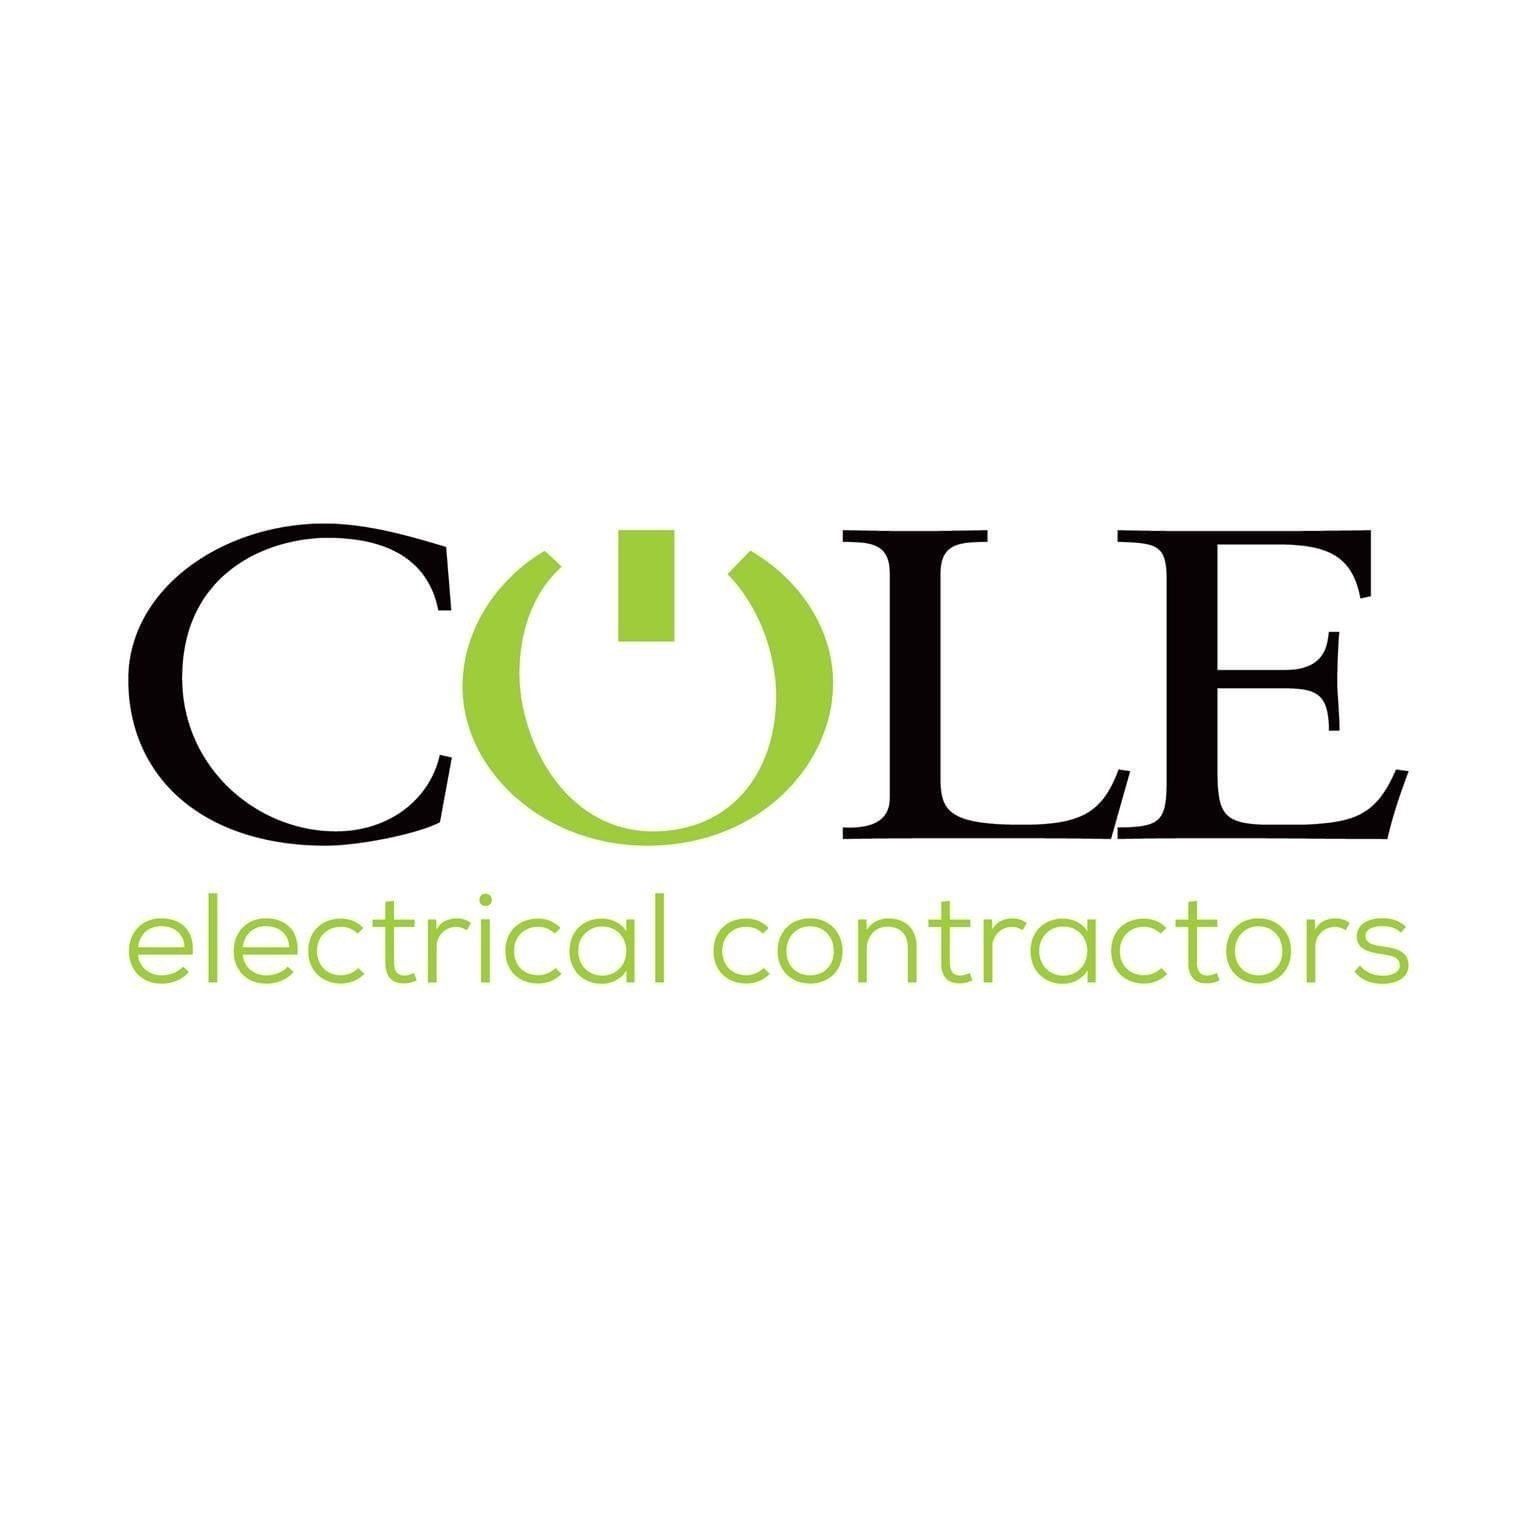 the logo for cole electrical contractors is green and black